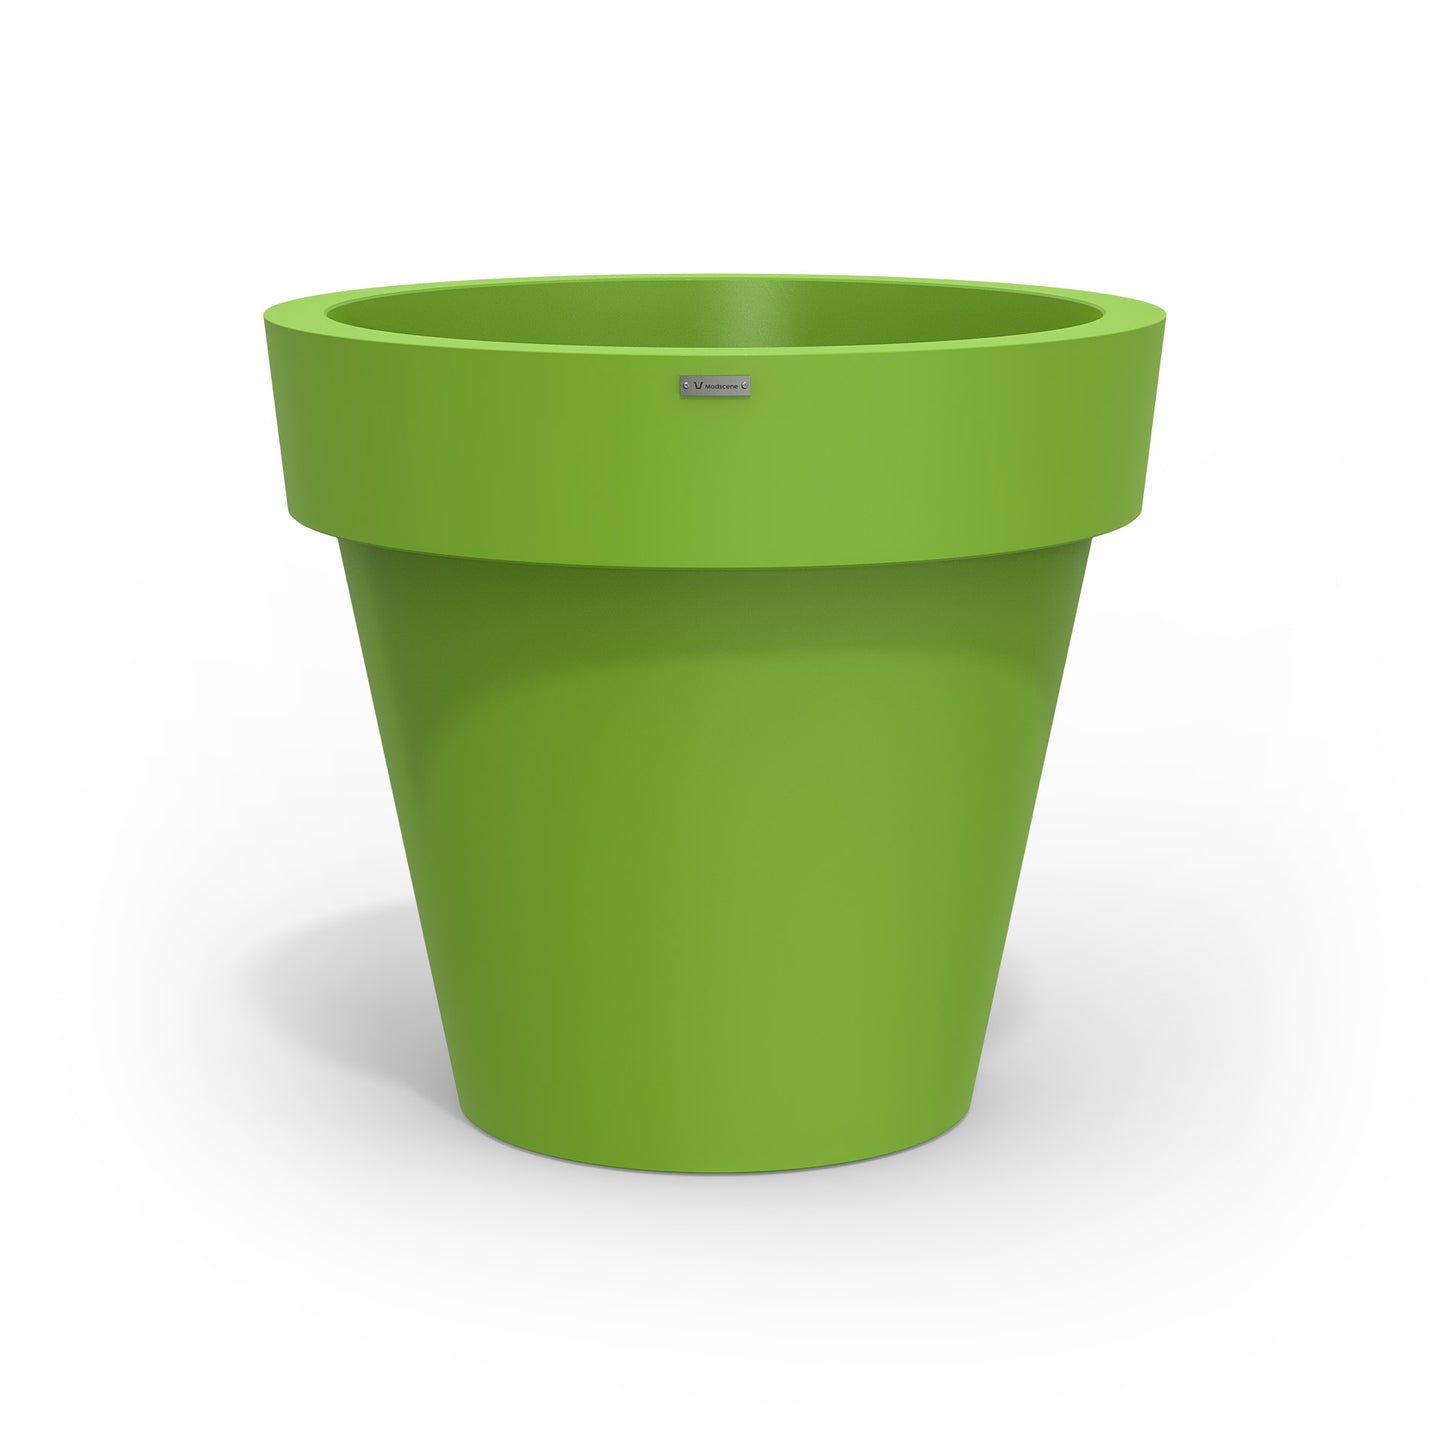 A large green planter pot made by Modscene New Zealand.